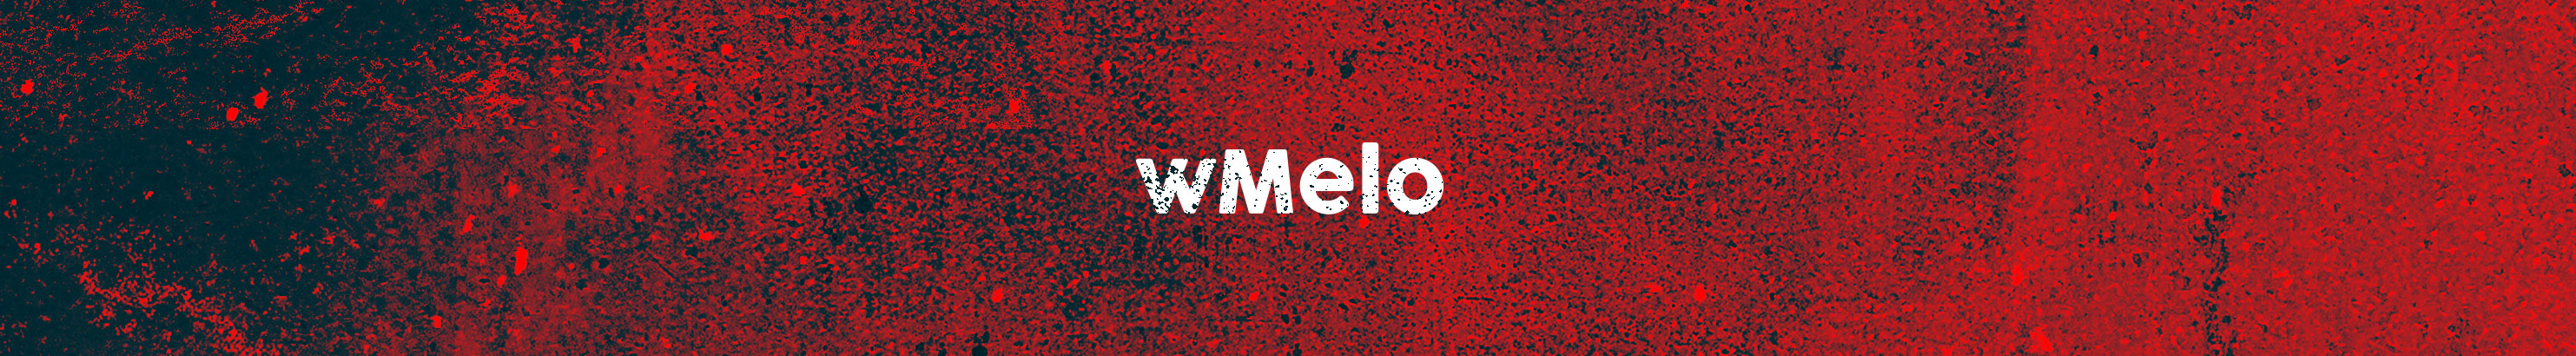 Wendell Melo's profile banner